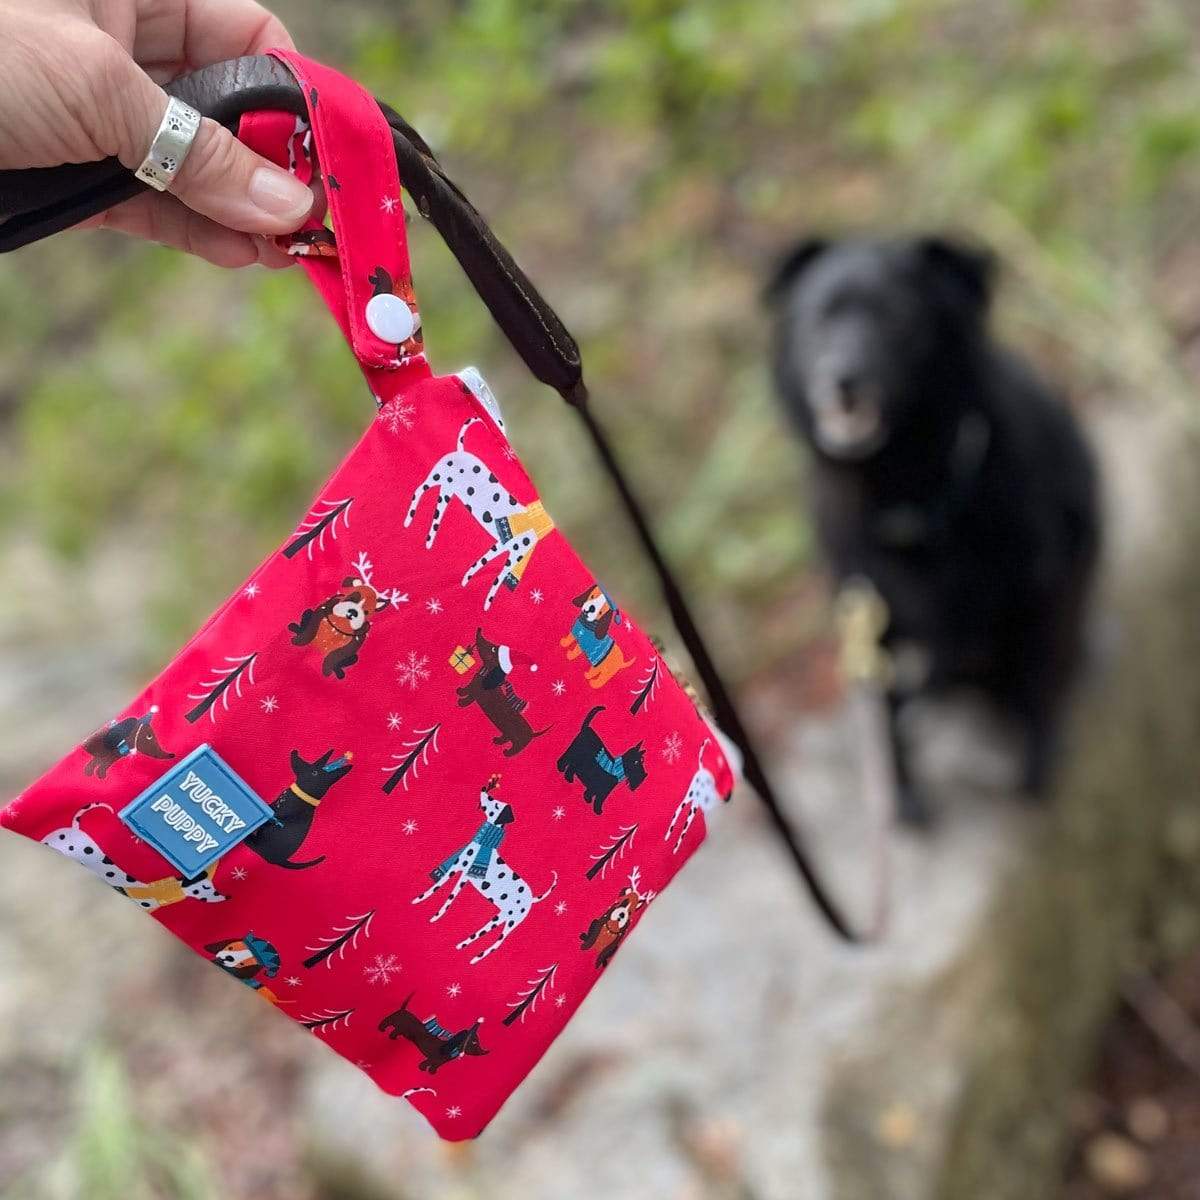 How to sew a dog poop bag holder  DIY dog waste bag dispenser  Easy  sewing project for beginners  YouTube